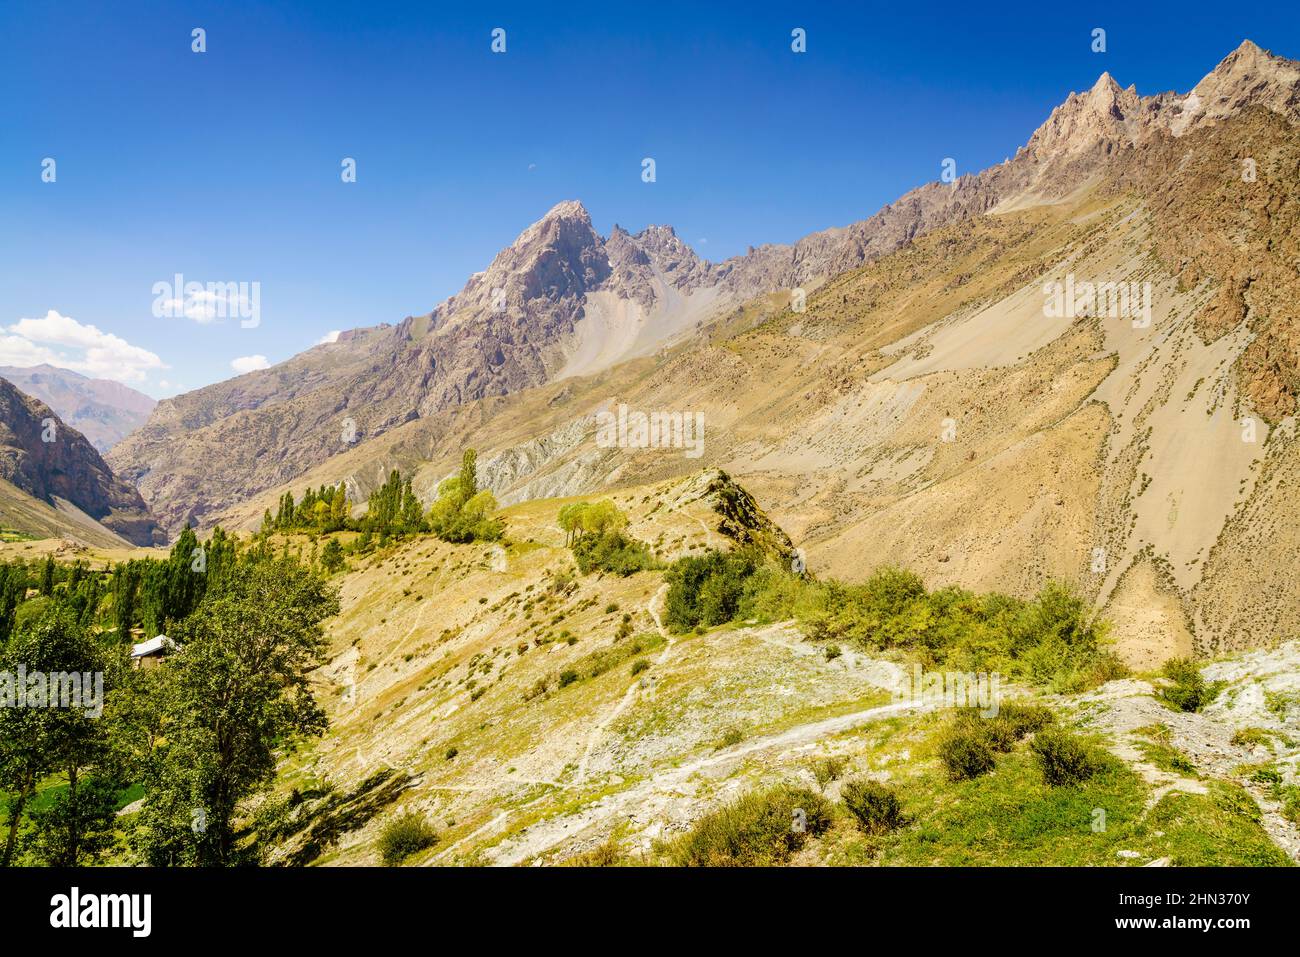 Scenic view of Yaghnob Valley and a mountain village in Tajikistan Stock Photo